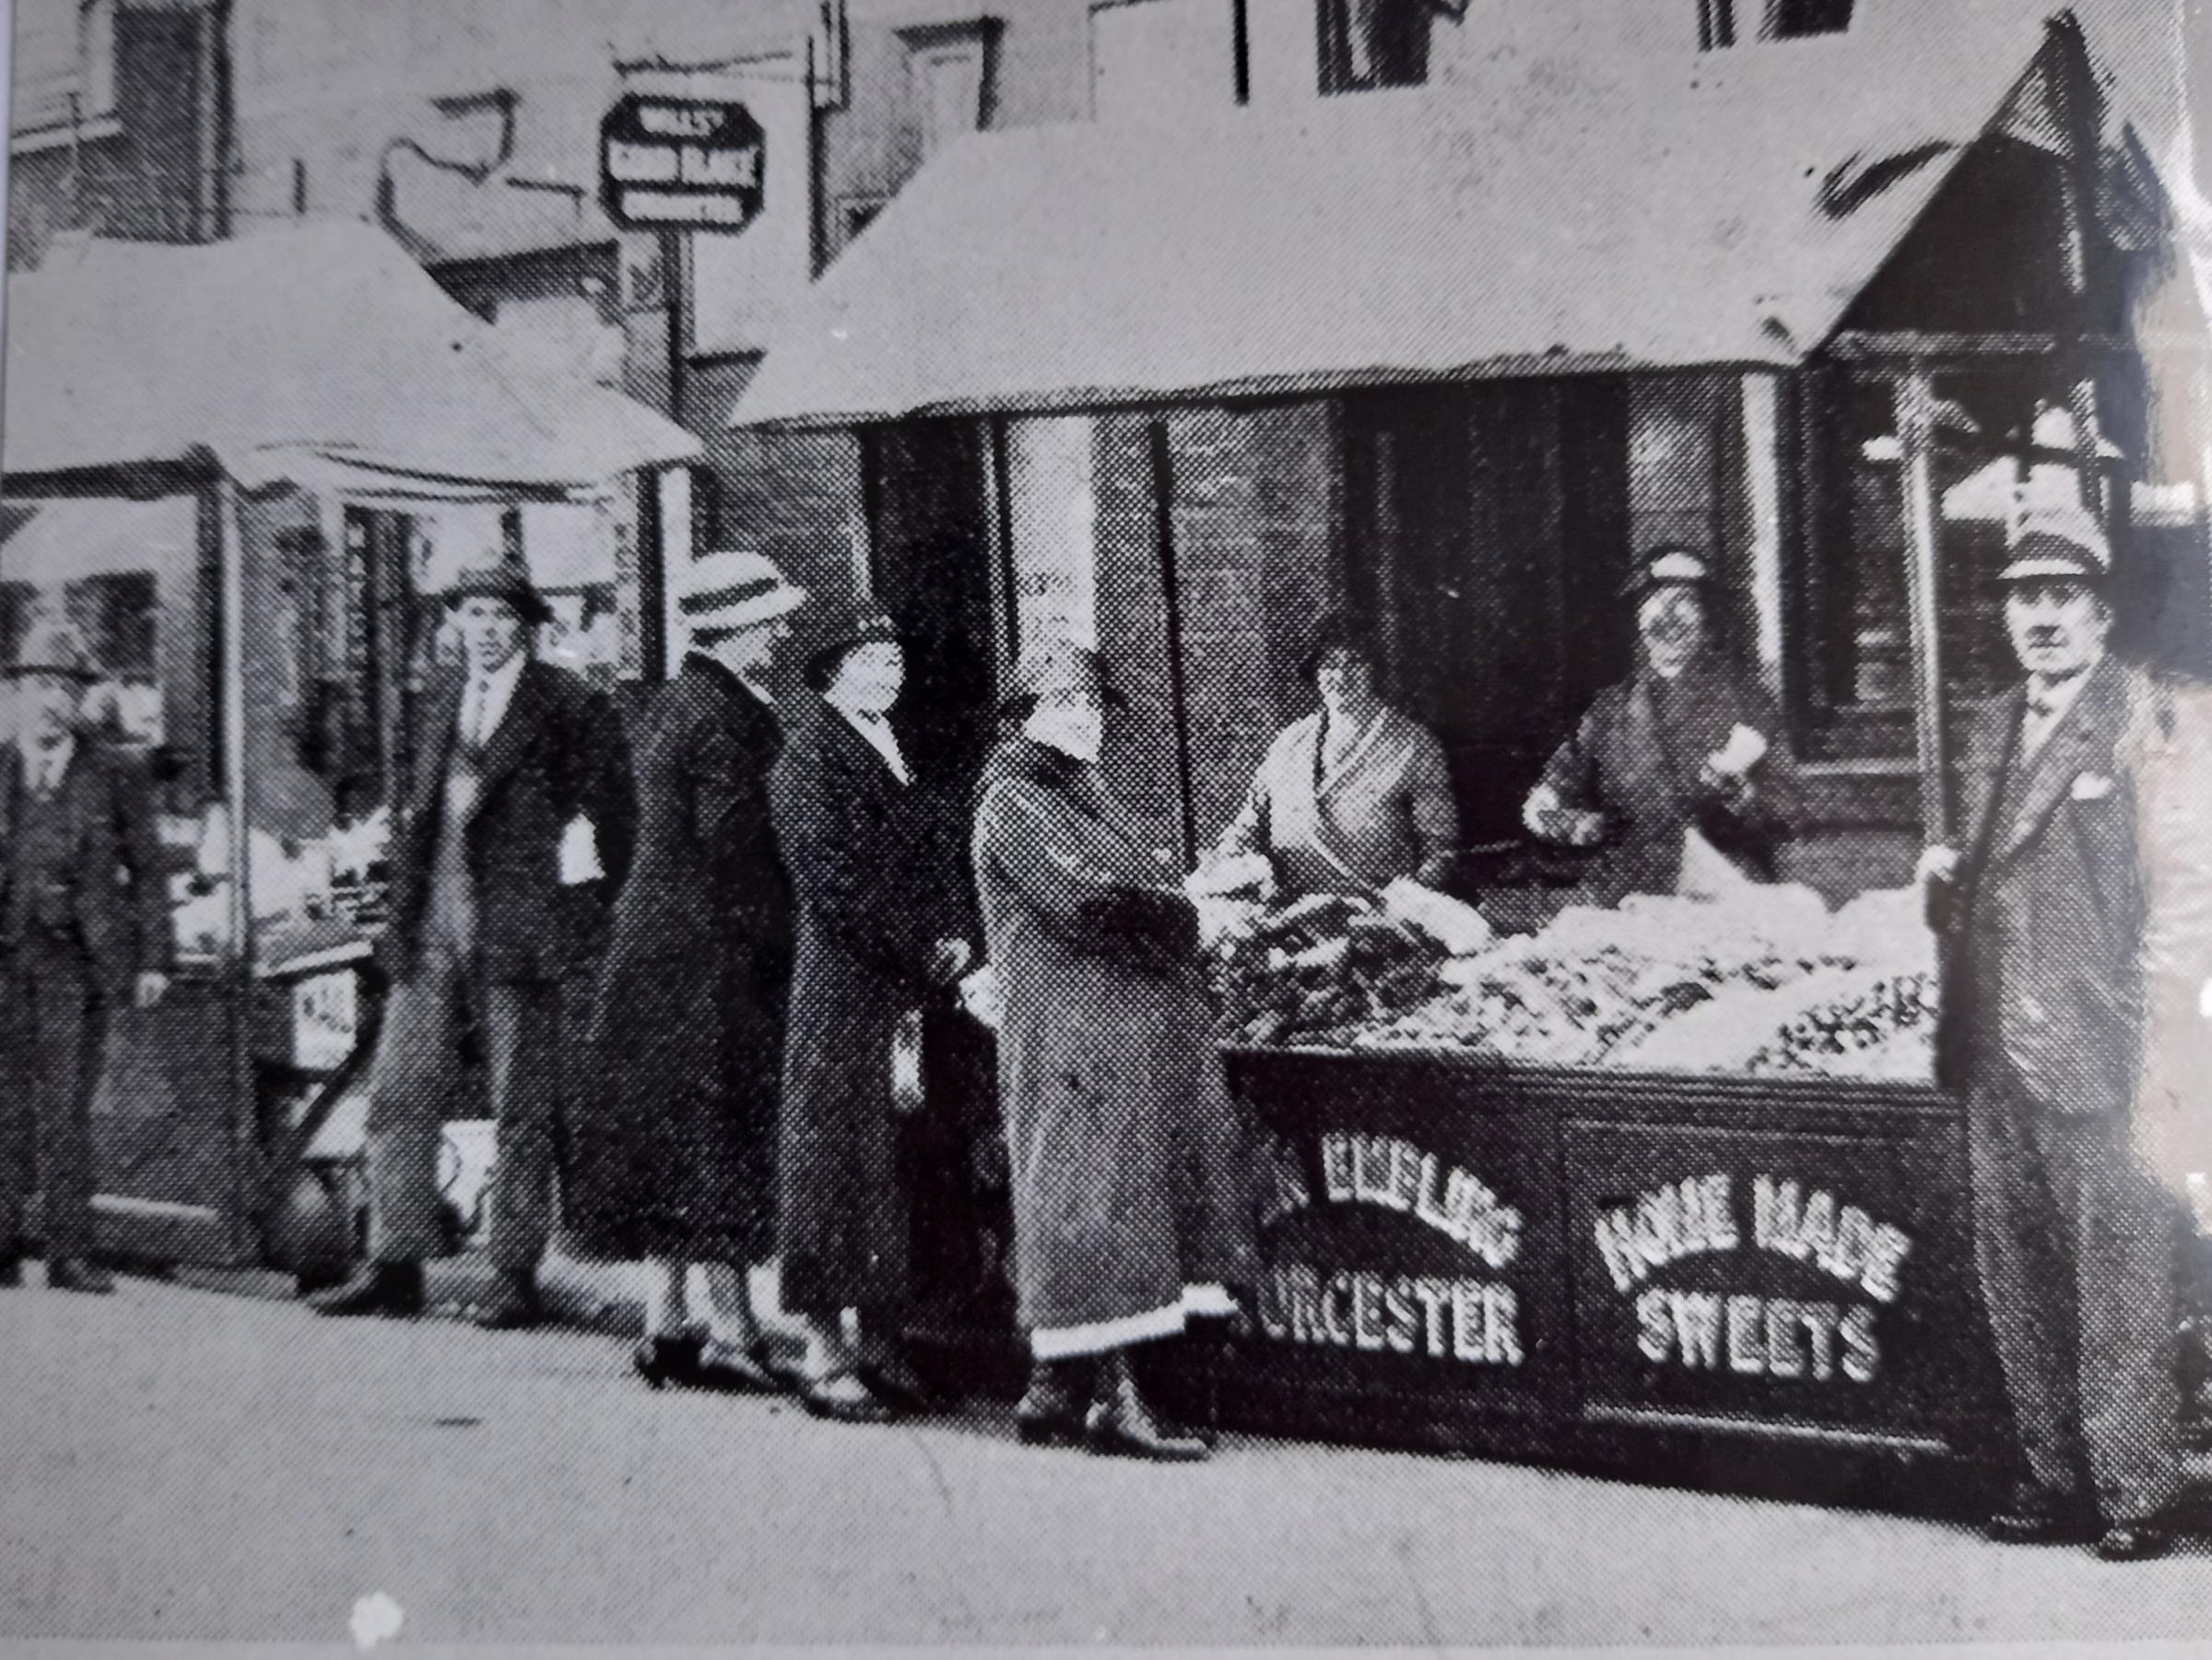 Embling’s home made sweets stall in Angel Street on fair day